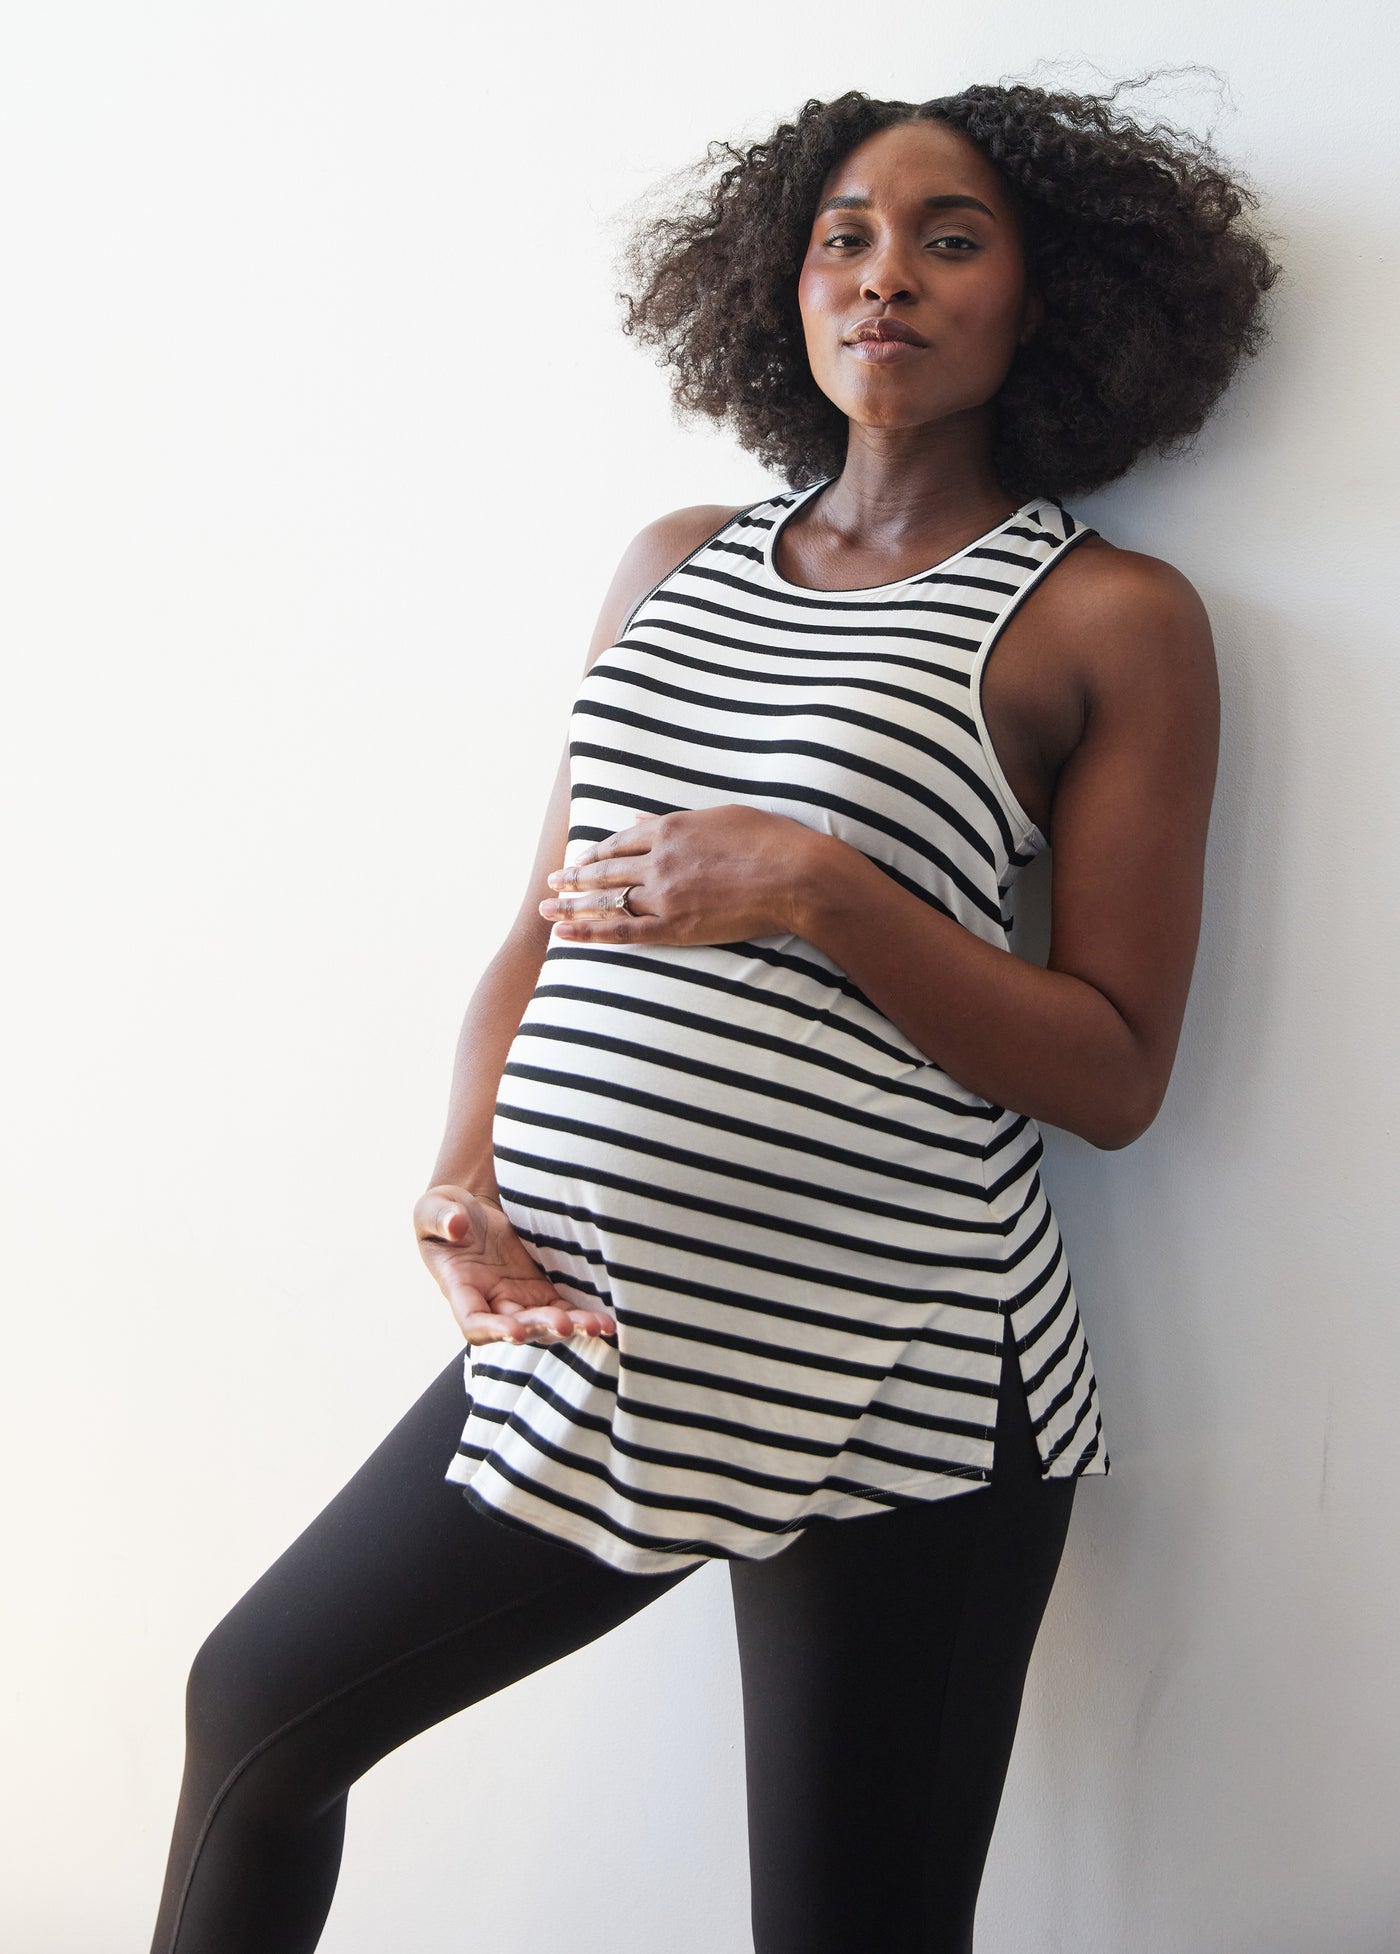 Desiree is 5’11", 8 months pregnant and wearing a size large||Black White Stripe